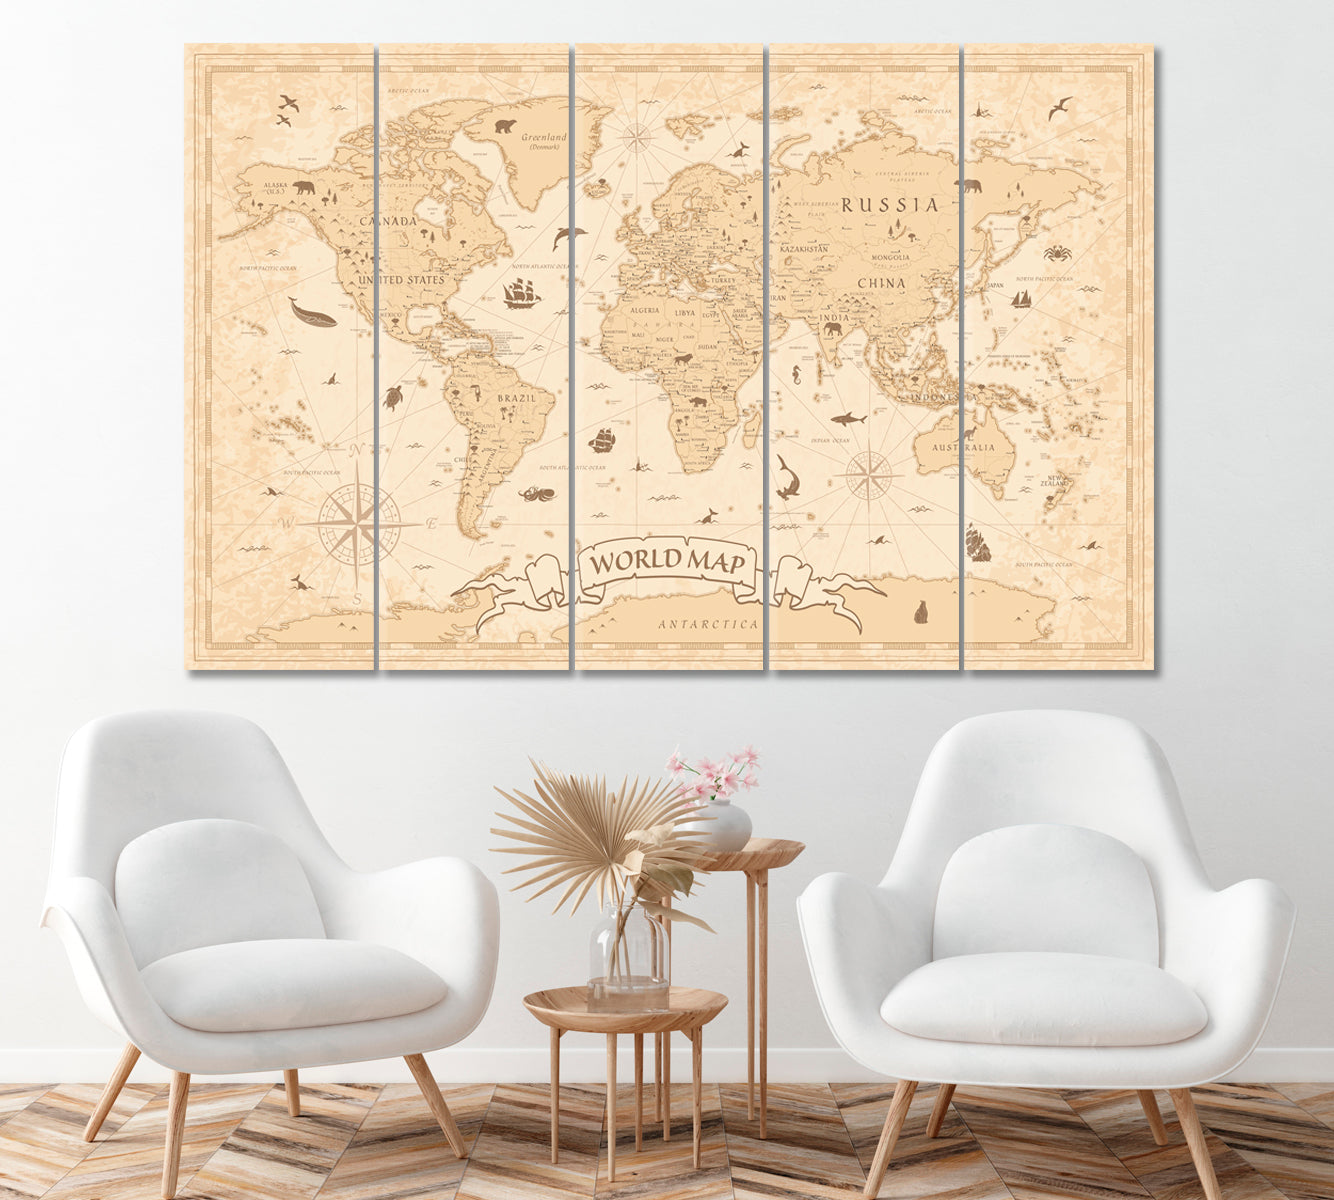 Vintage World Map Canvas Print ArtLexy 5 Panels 36"x24" inches 